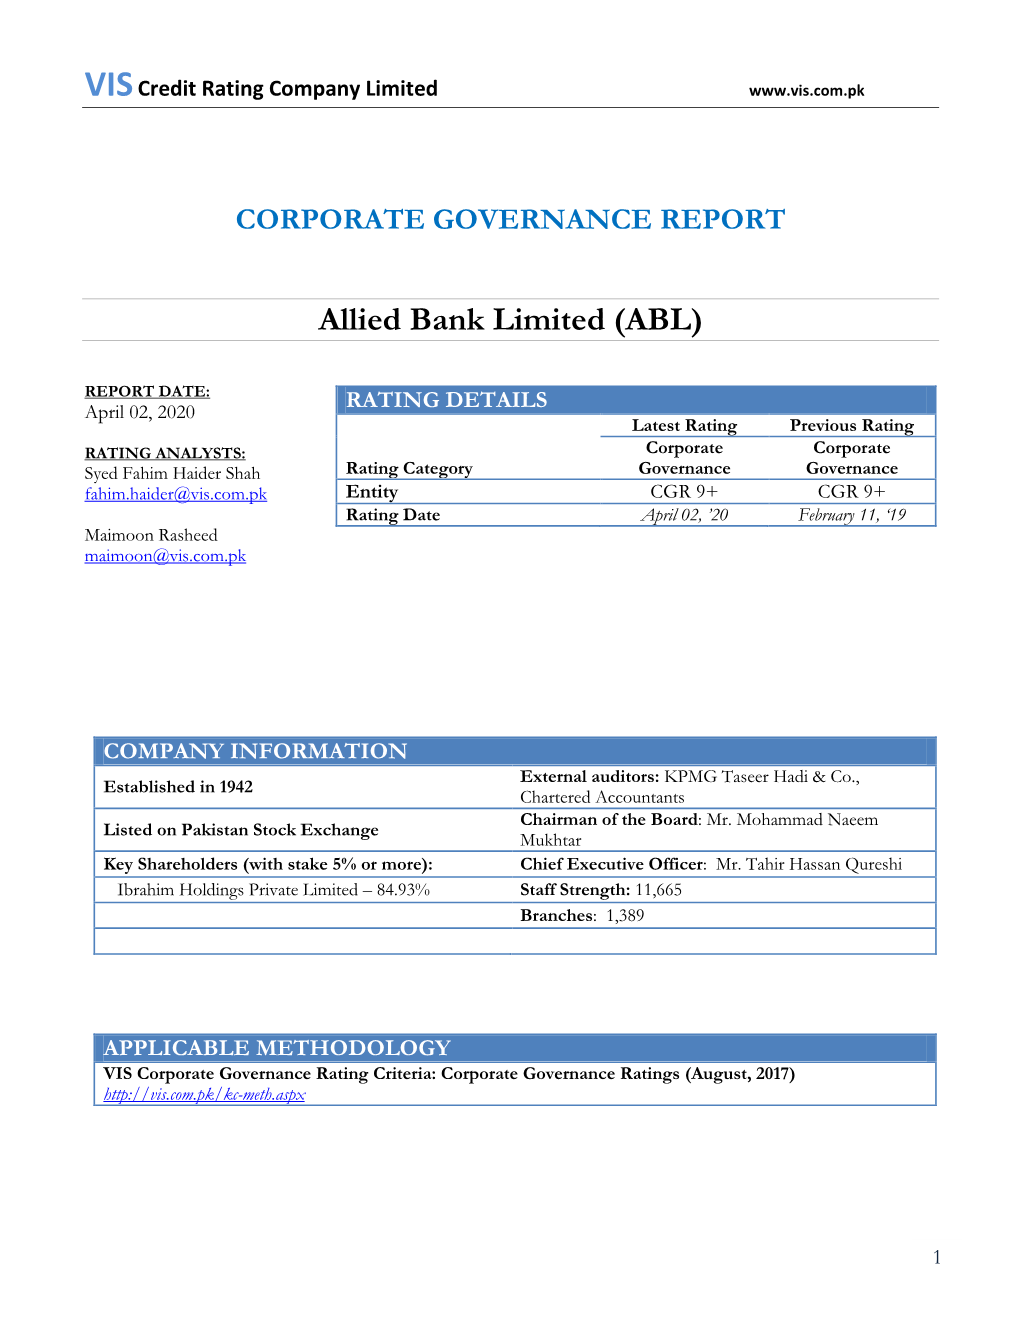 Allied Bank Limited (ABL)